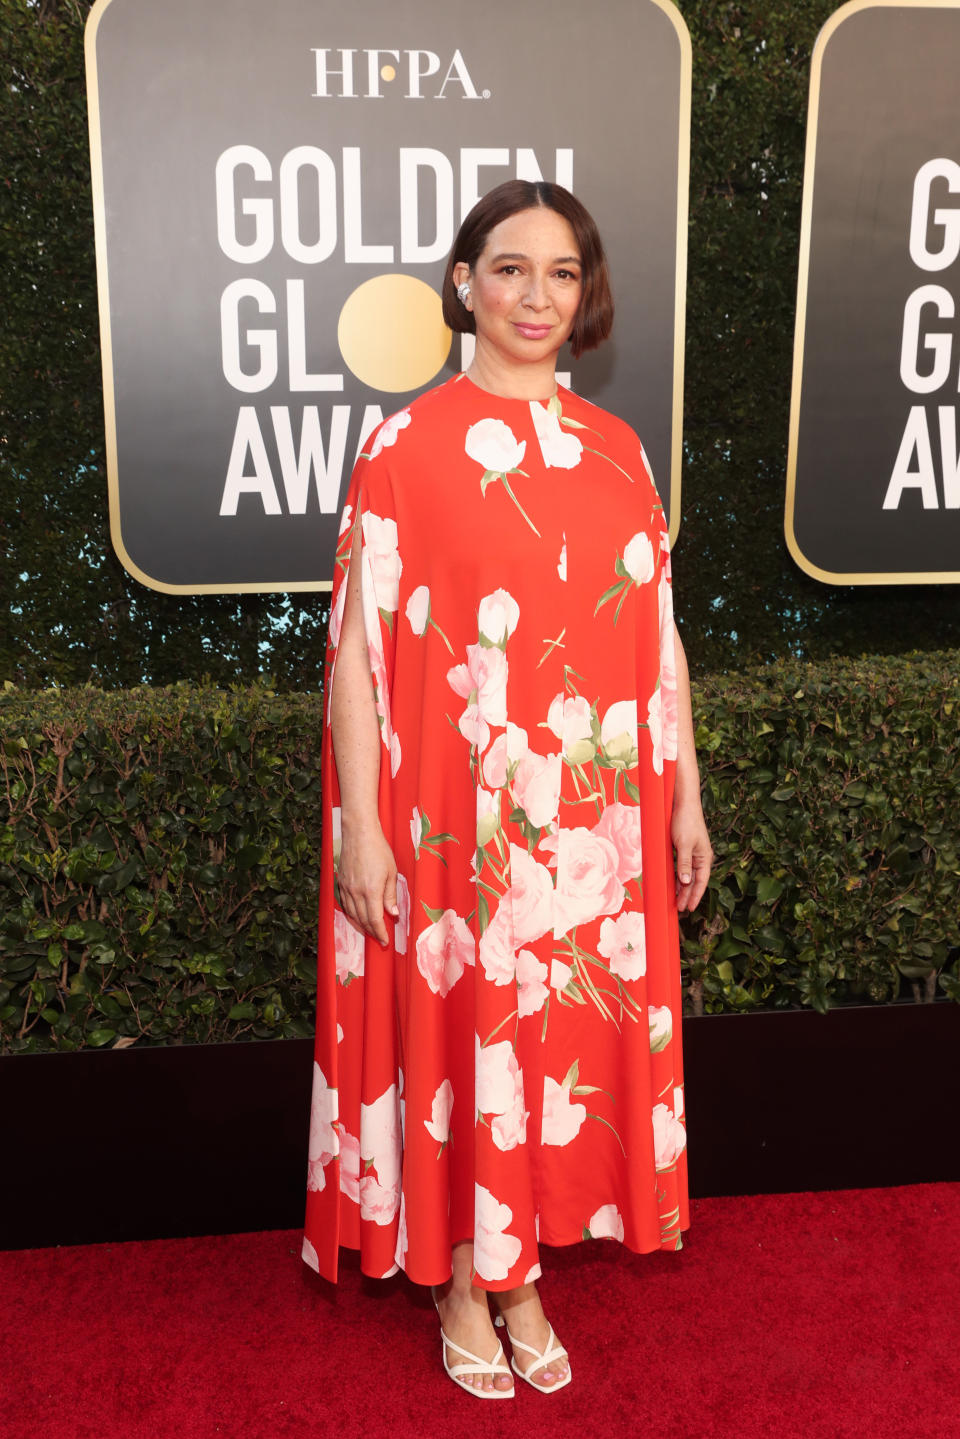 Maya Rudolph attends the 78th Annual Golden Globe Awards held at The Beverly Hilton and broadcast on February 28, 2021 in Beverly Hills, California.